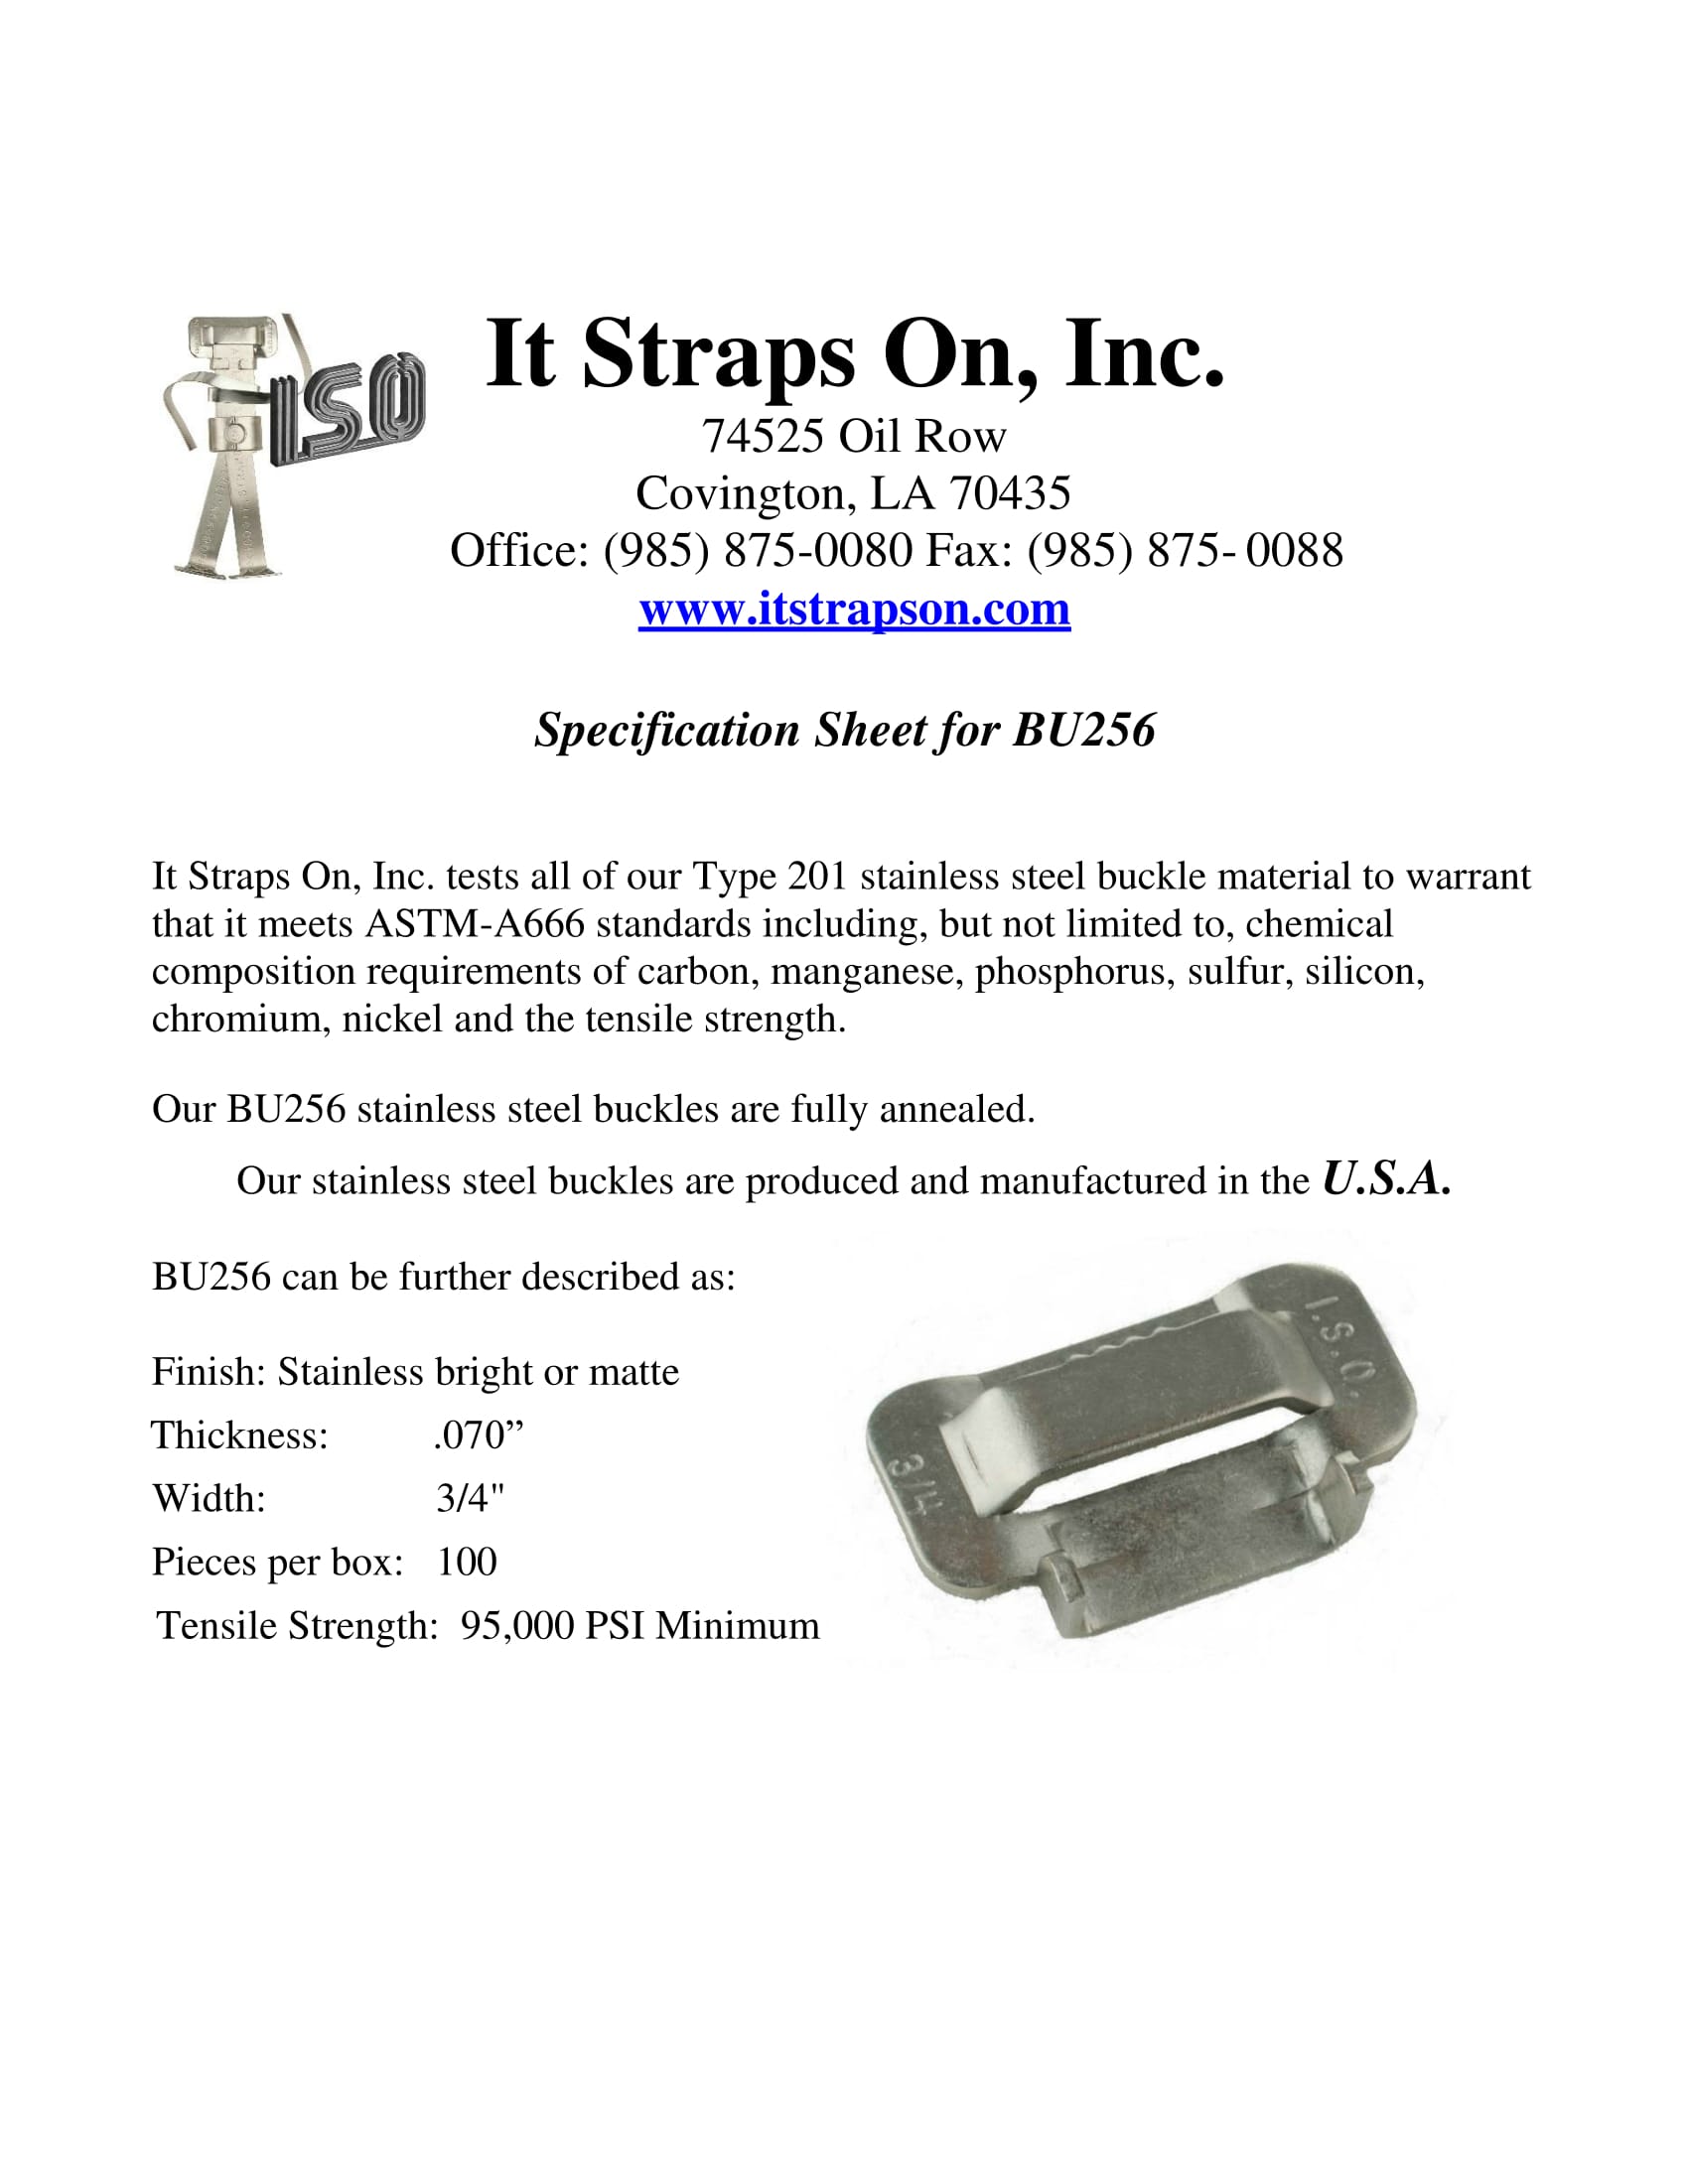 201 Stainless Steel Buckles 3/4”. 100 per Box - #BU256 - ISO Stainless